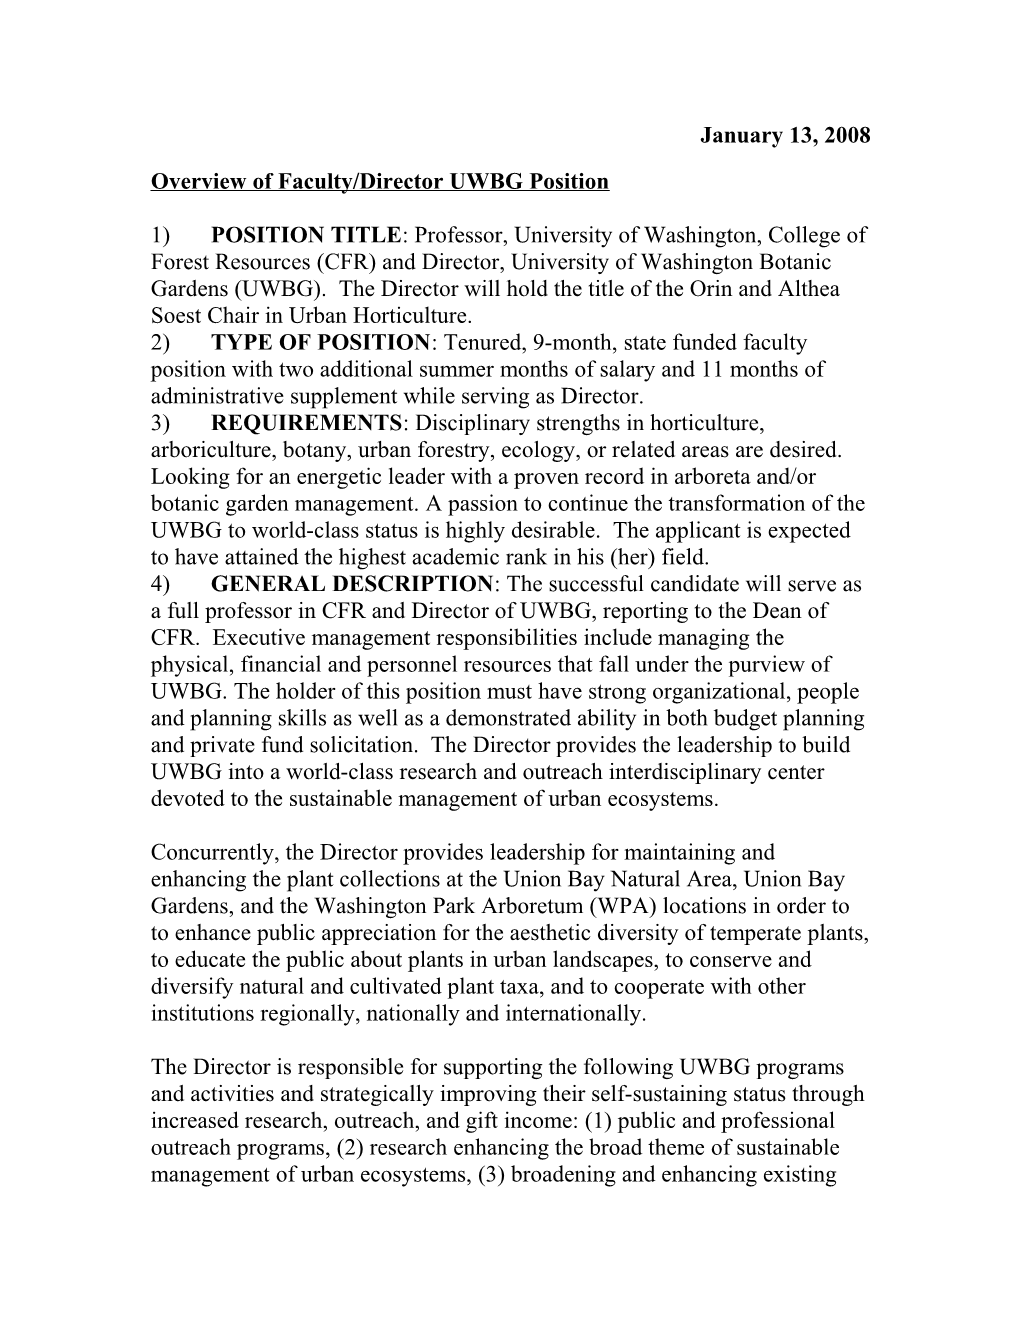 Overview of Faculty Position